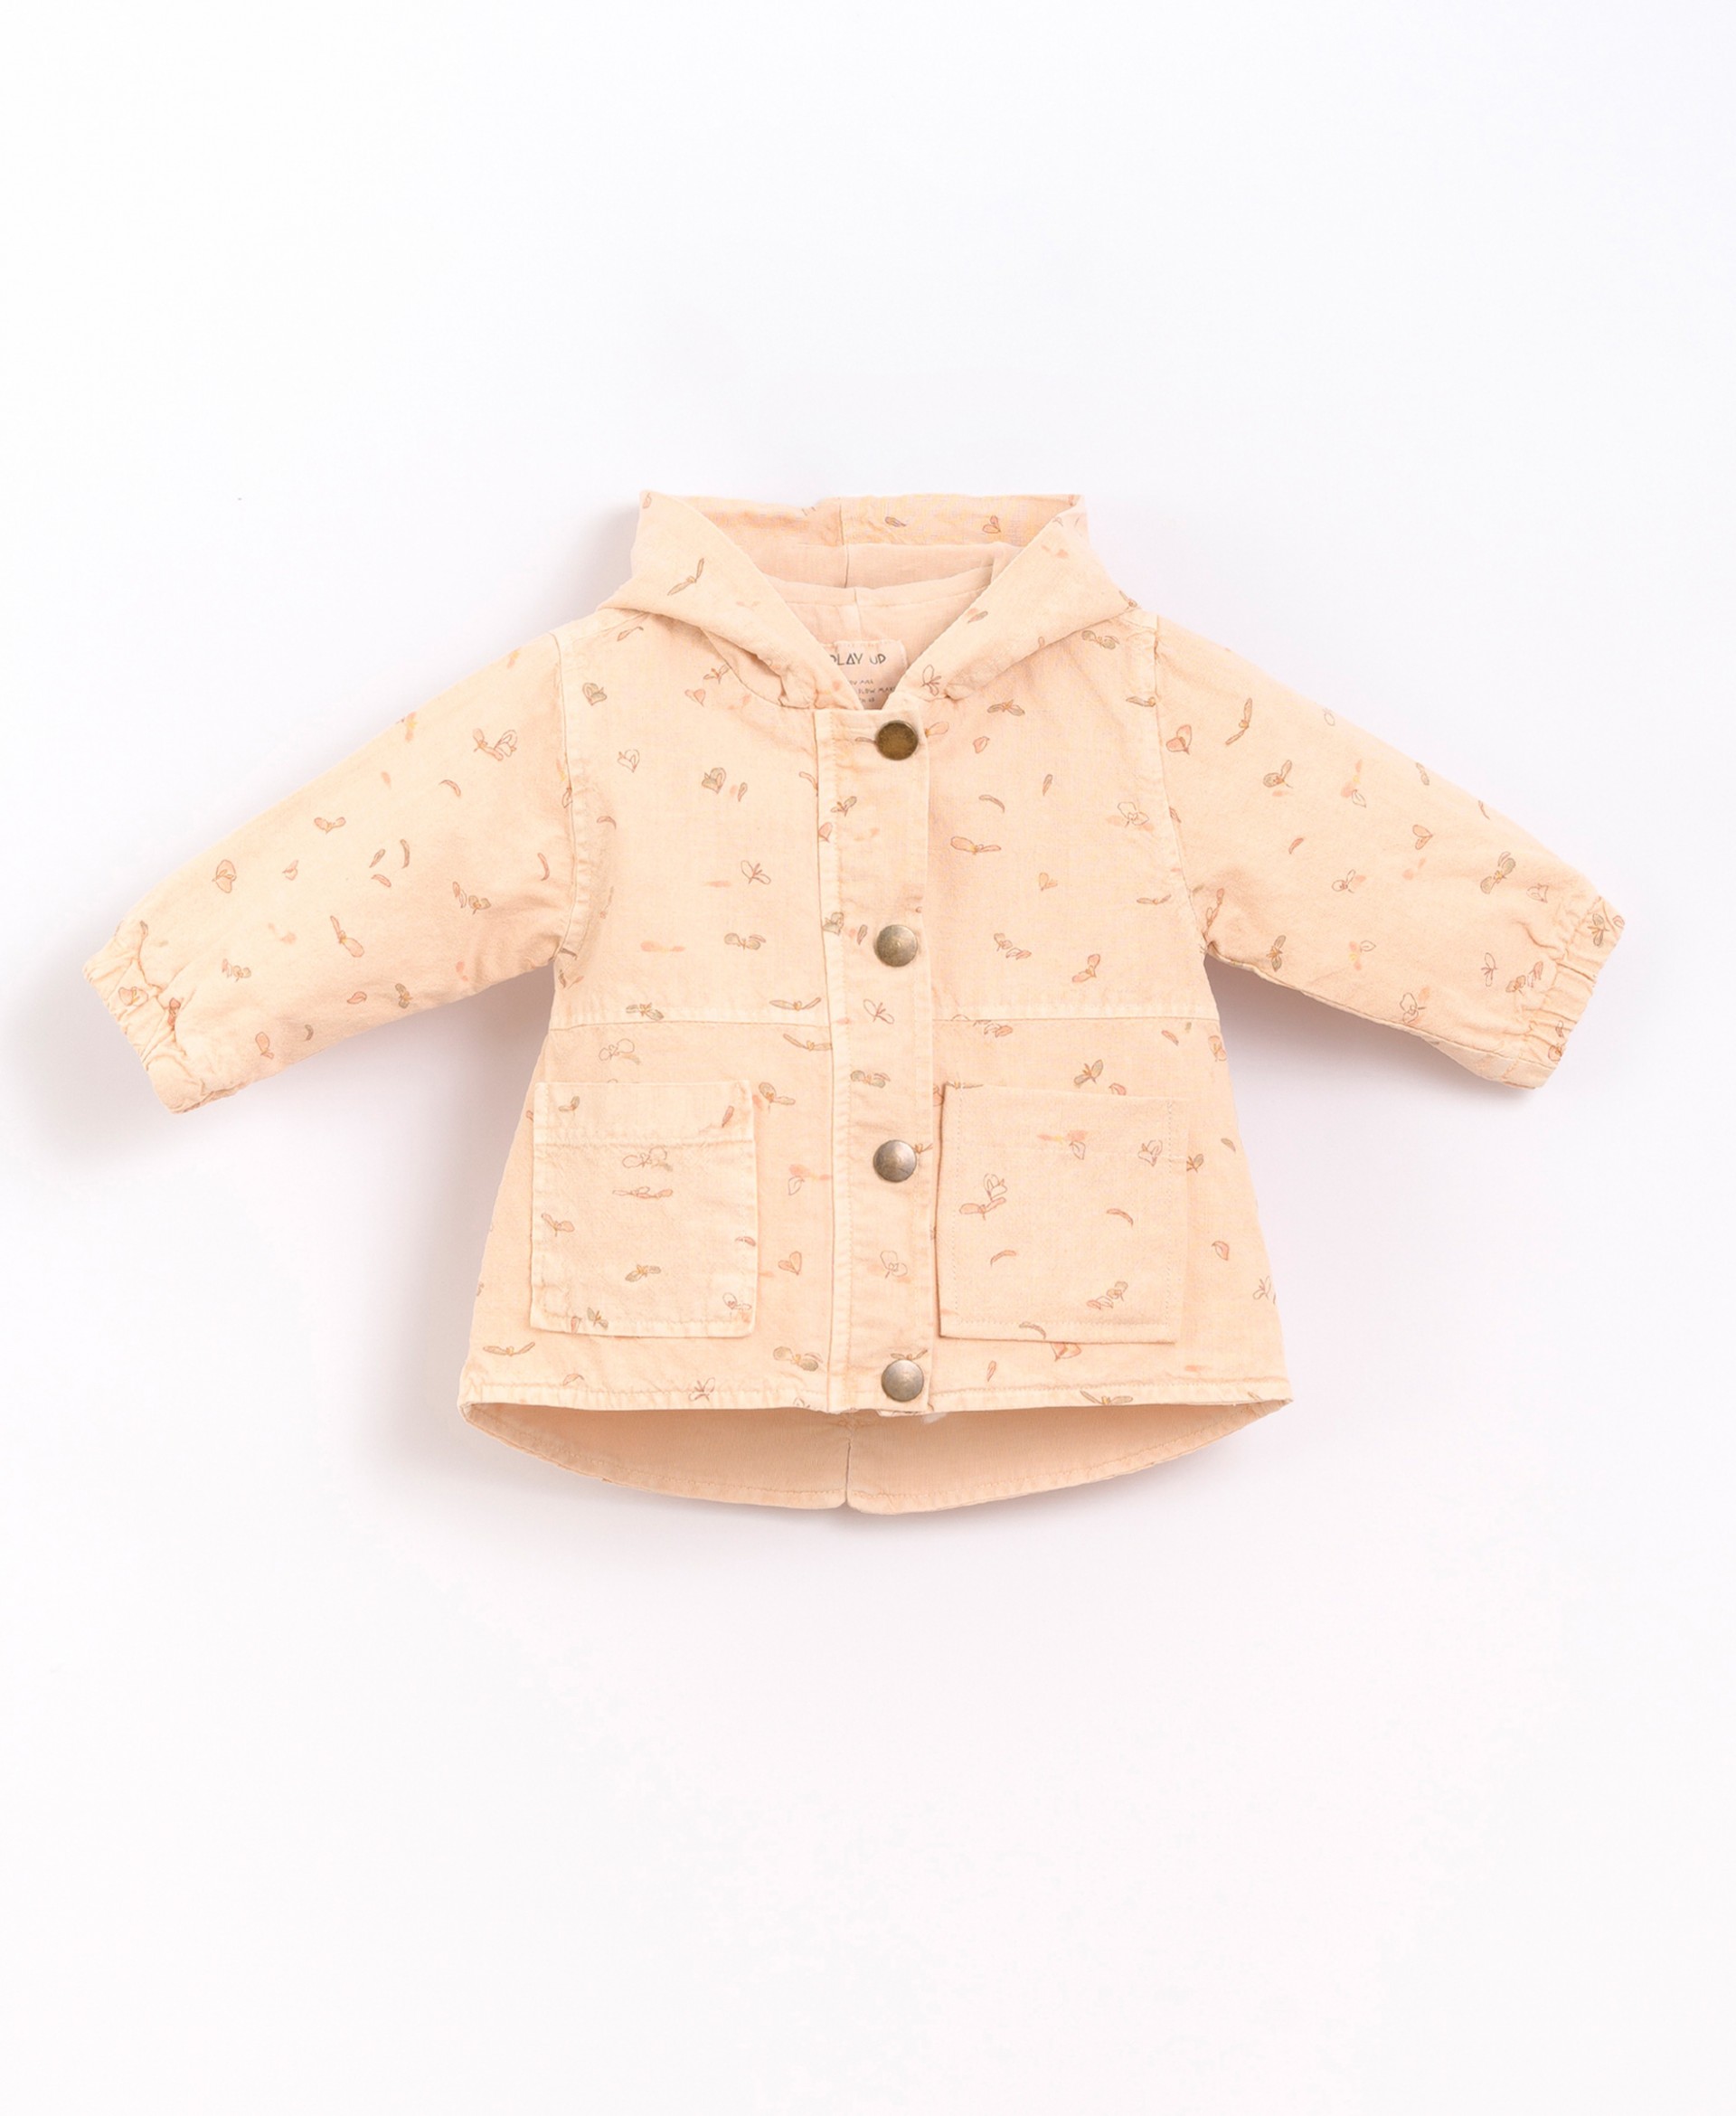 Twill jacket with lining | Basketry